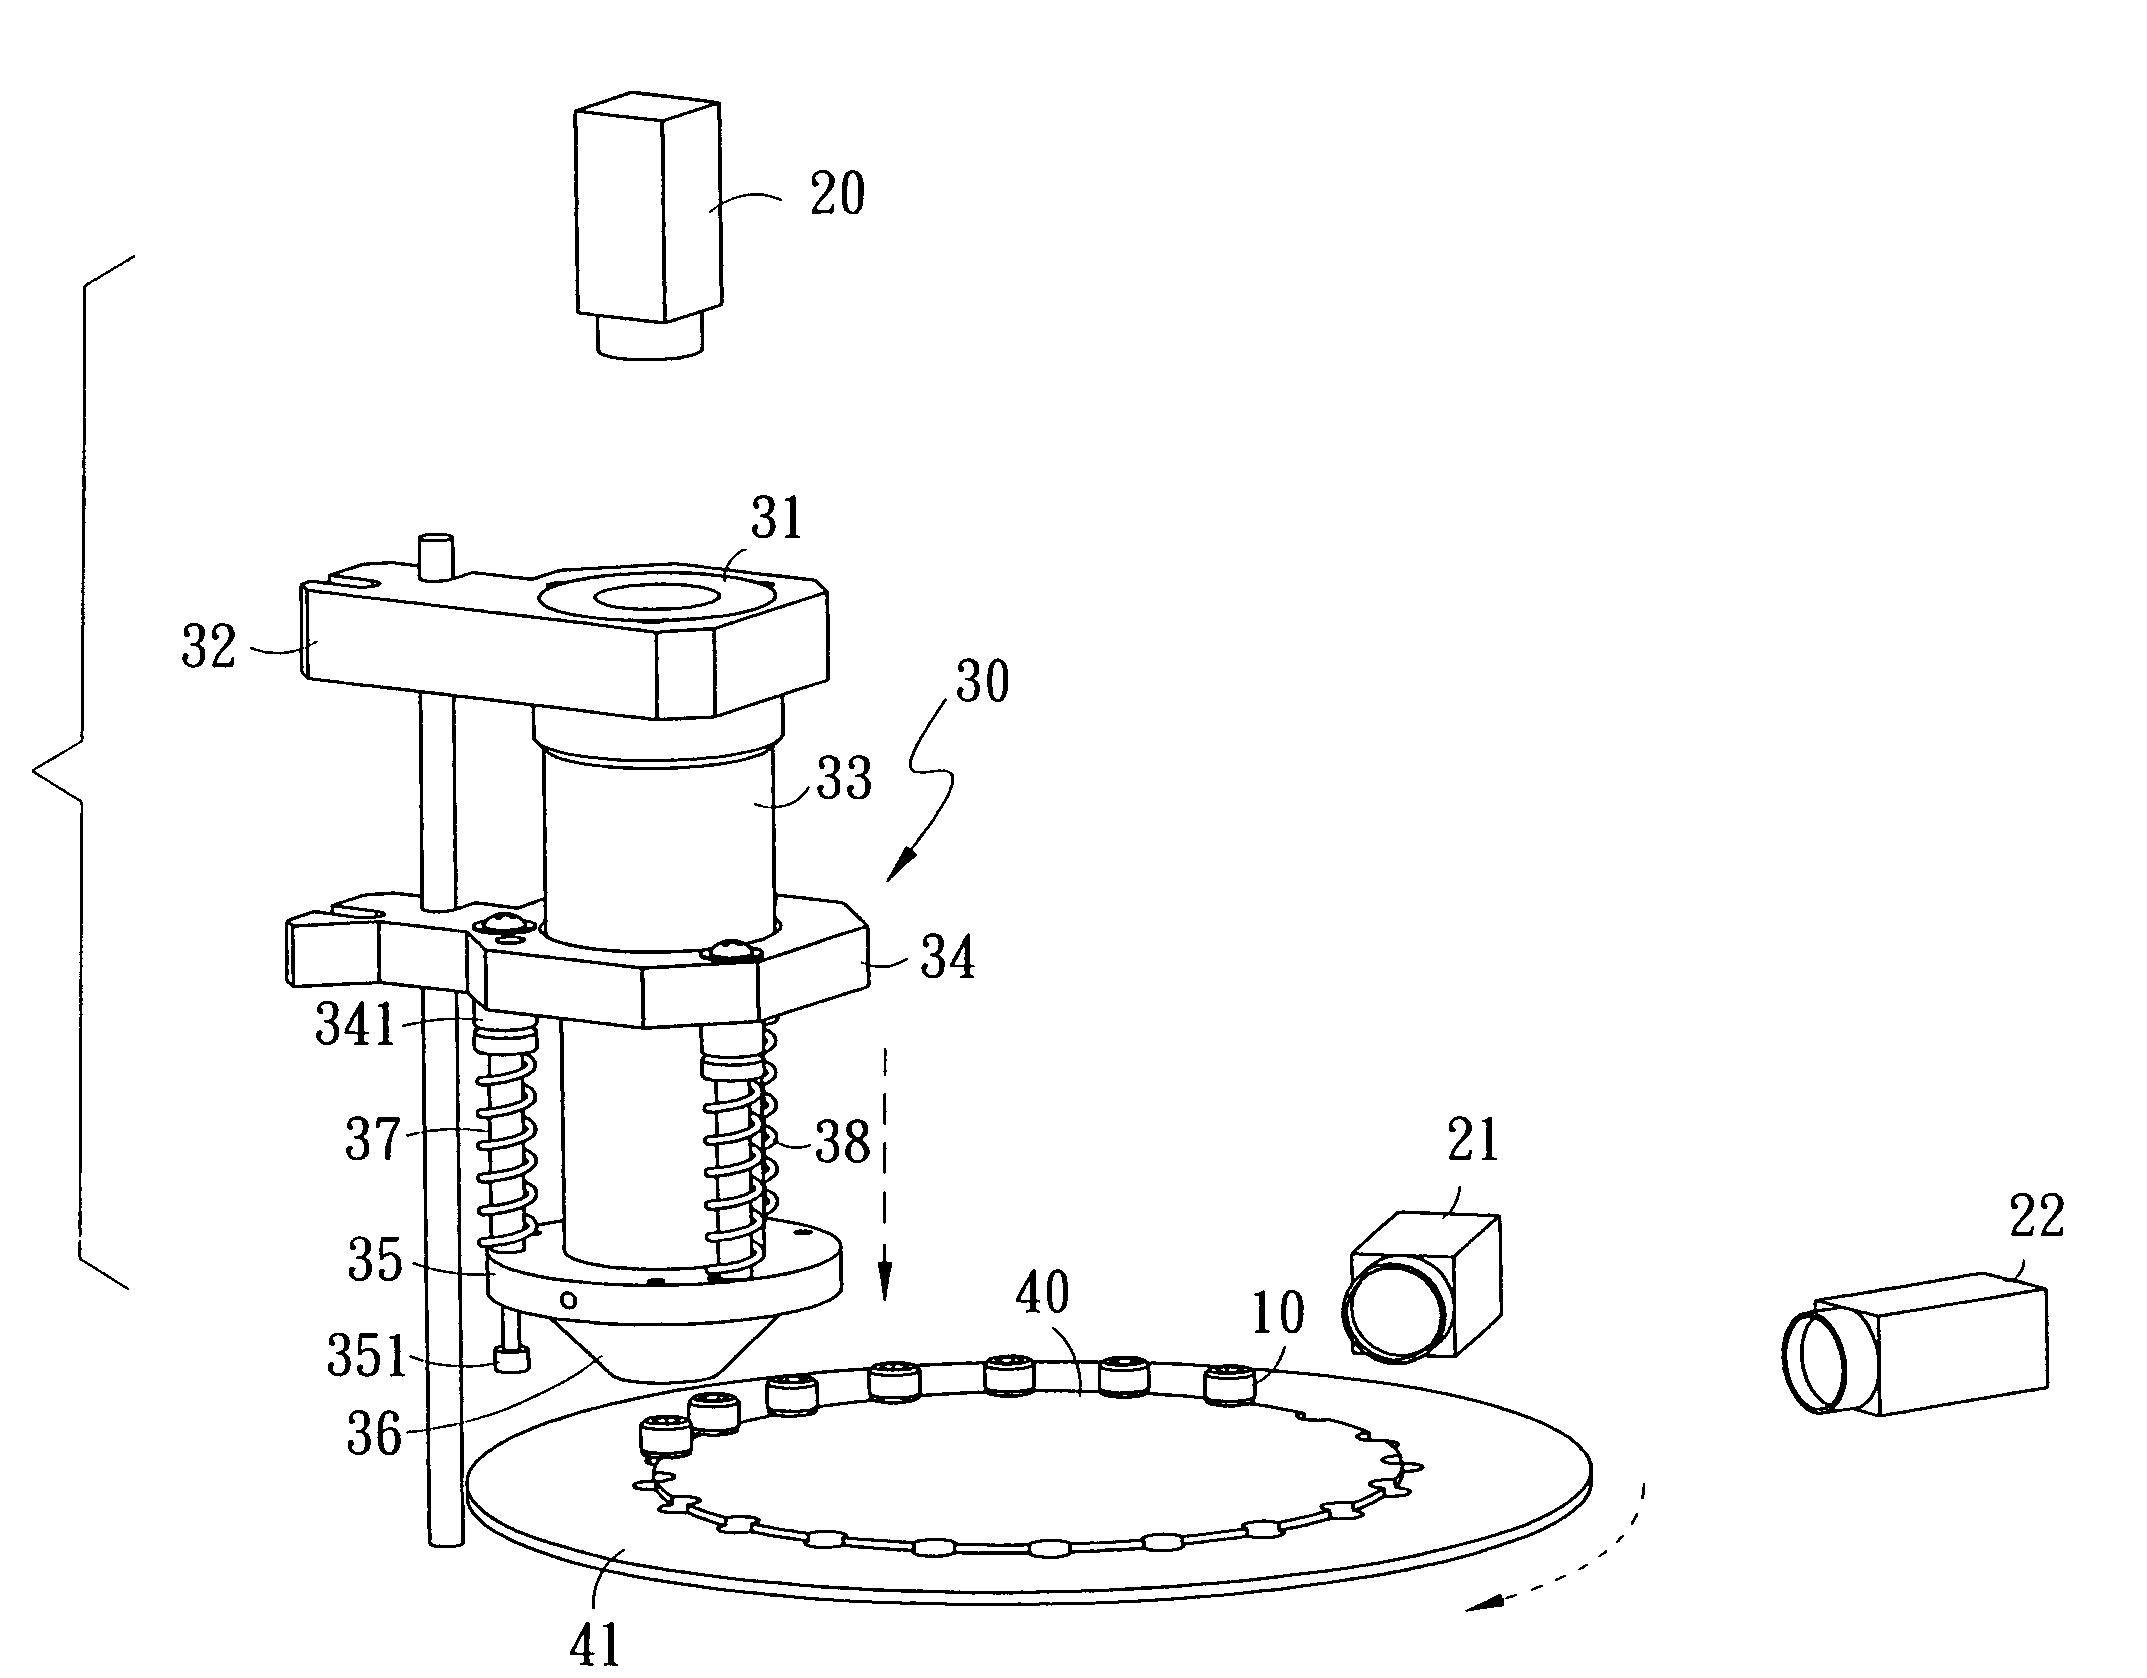 Component inspection imaging apparatus structure